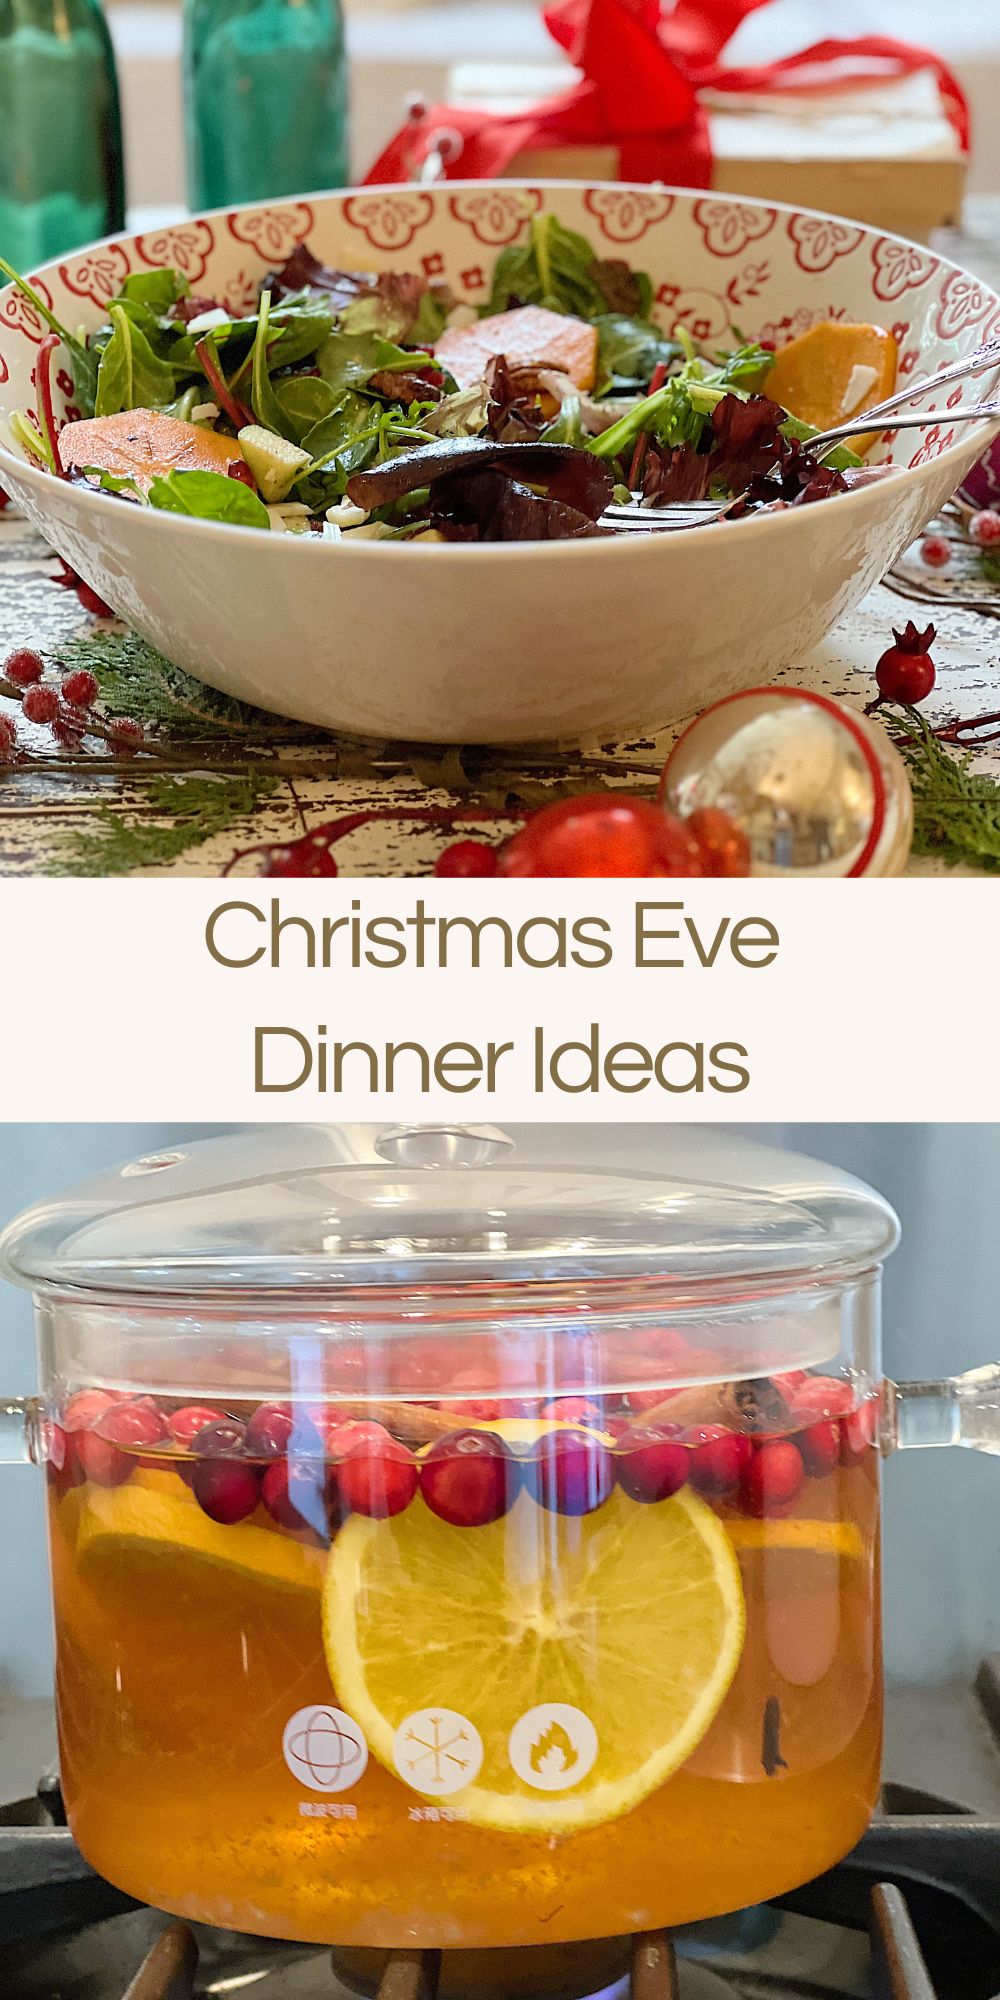 As you plan your Christmas menus, I wanted to share three delicious recipes for Christmas Eve dinner ideas. These are easy to make and delicious!